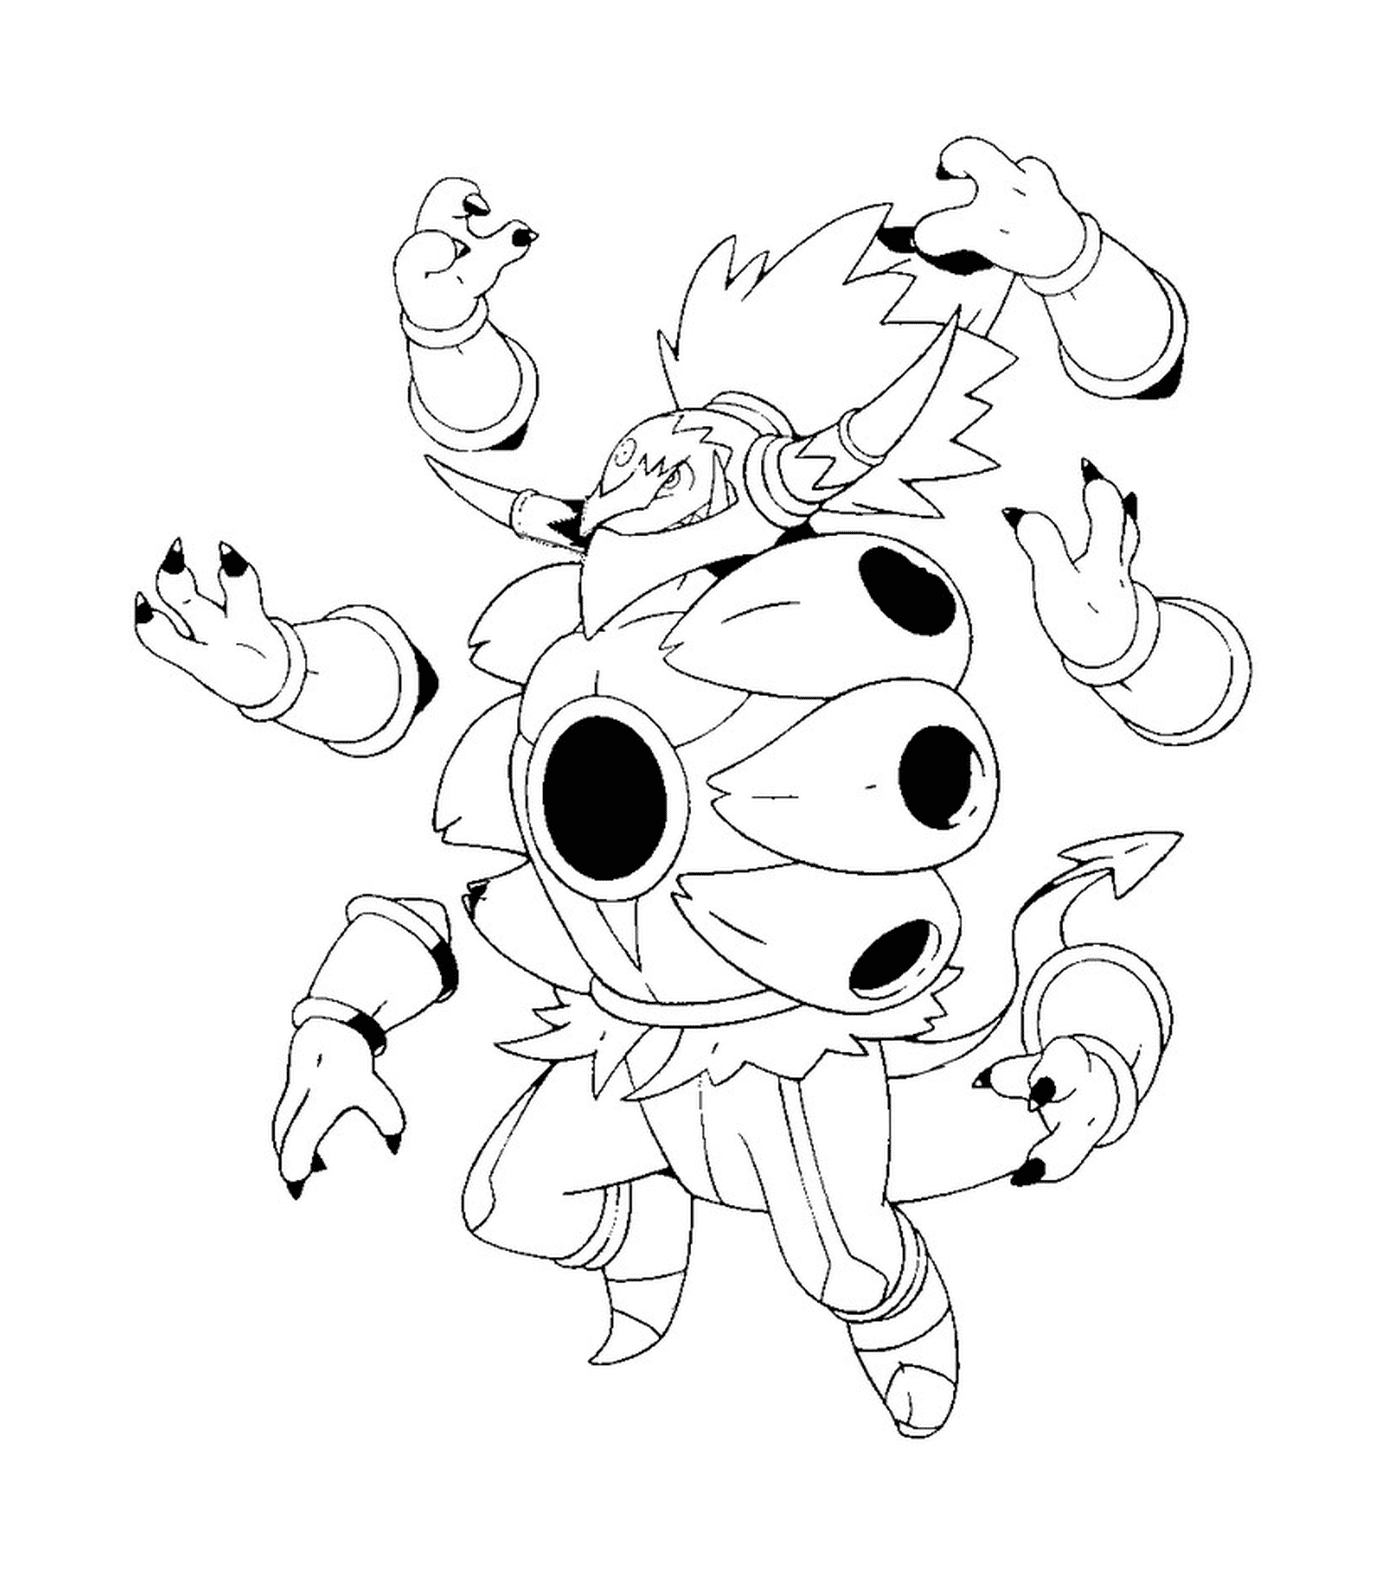  Hoopa Scattered, drawing 